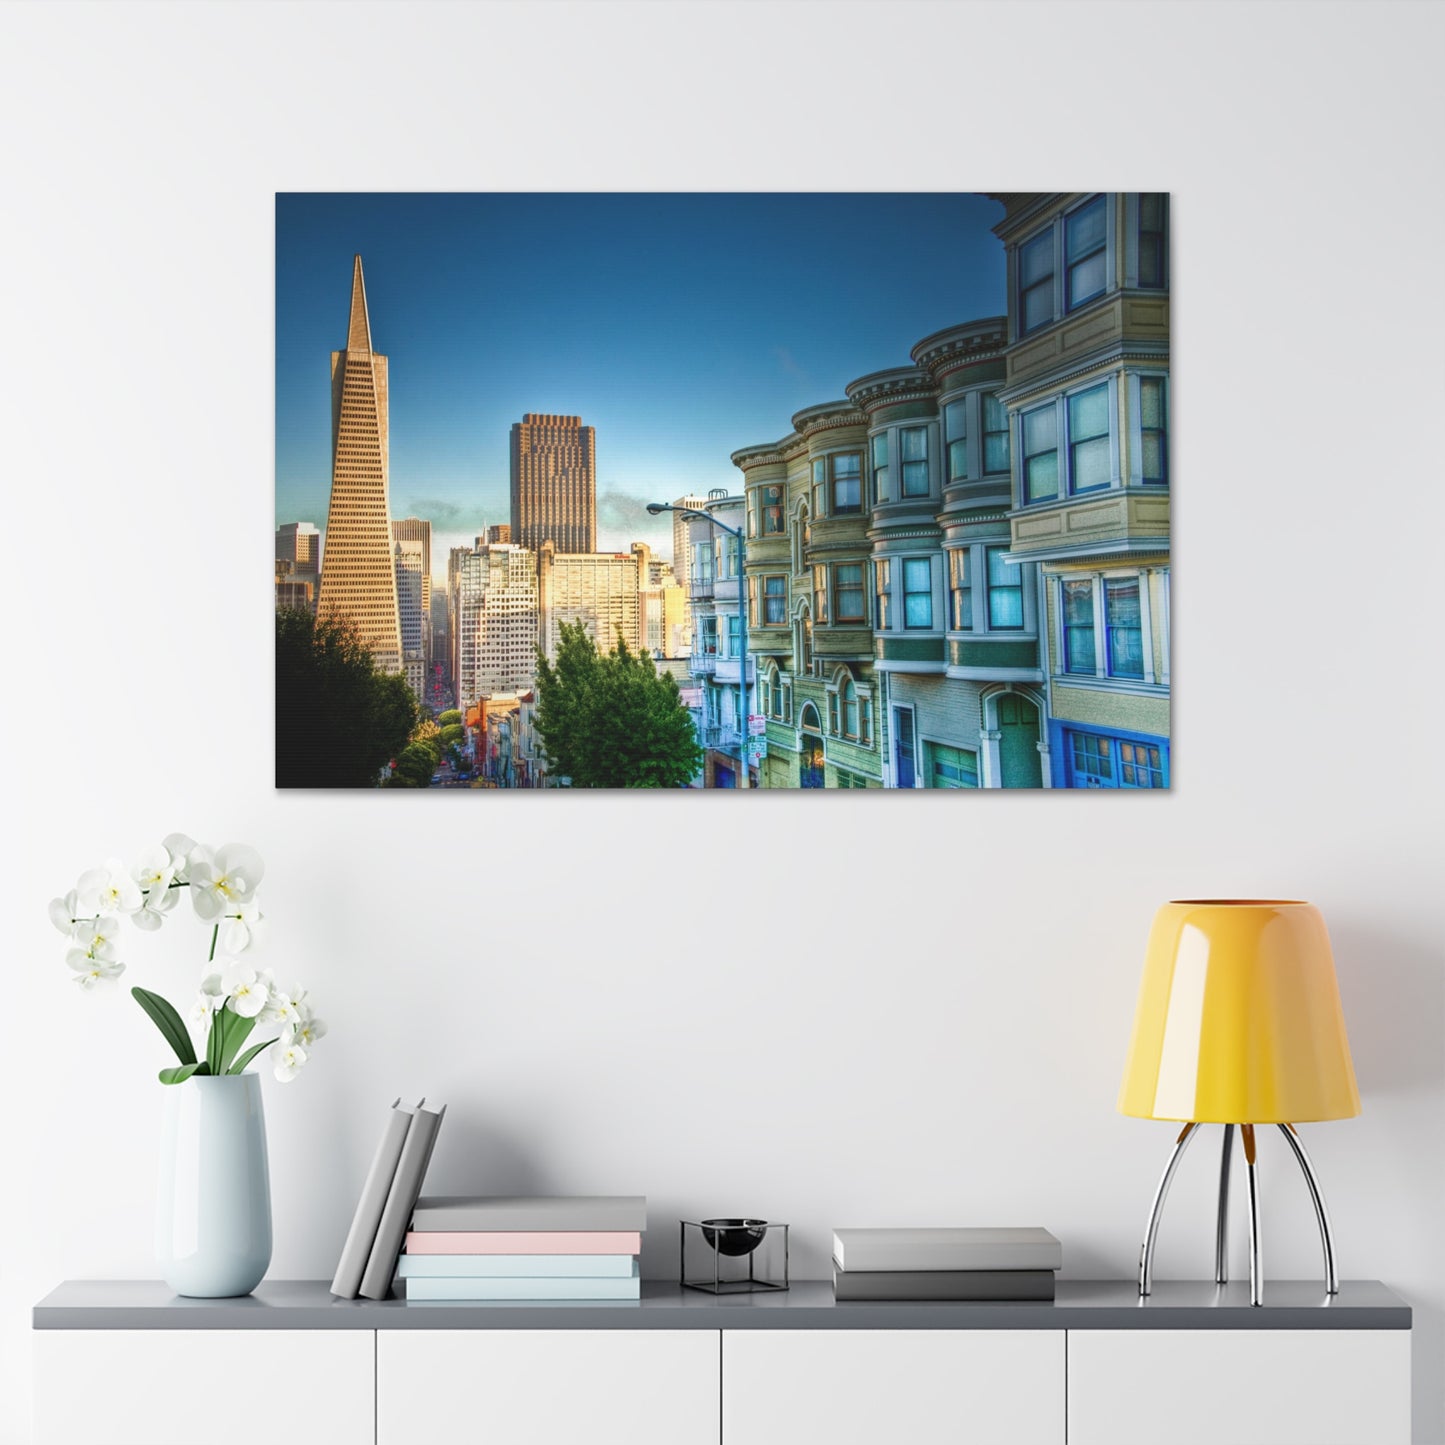 Canvas Print Of Victorian Houses And Transamerica In San Francisco For Wall Art